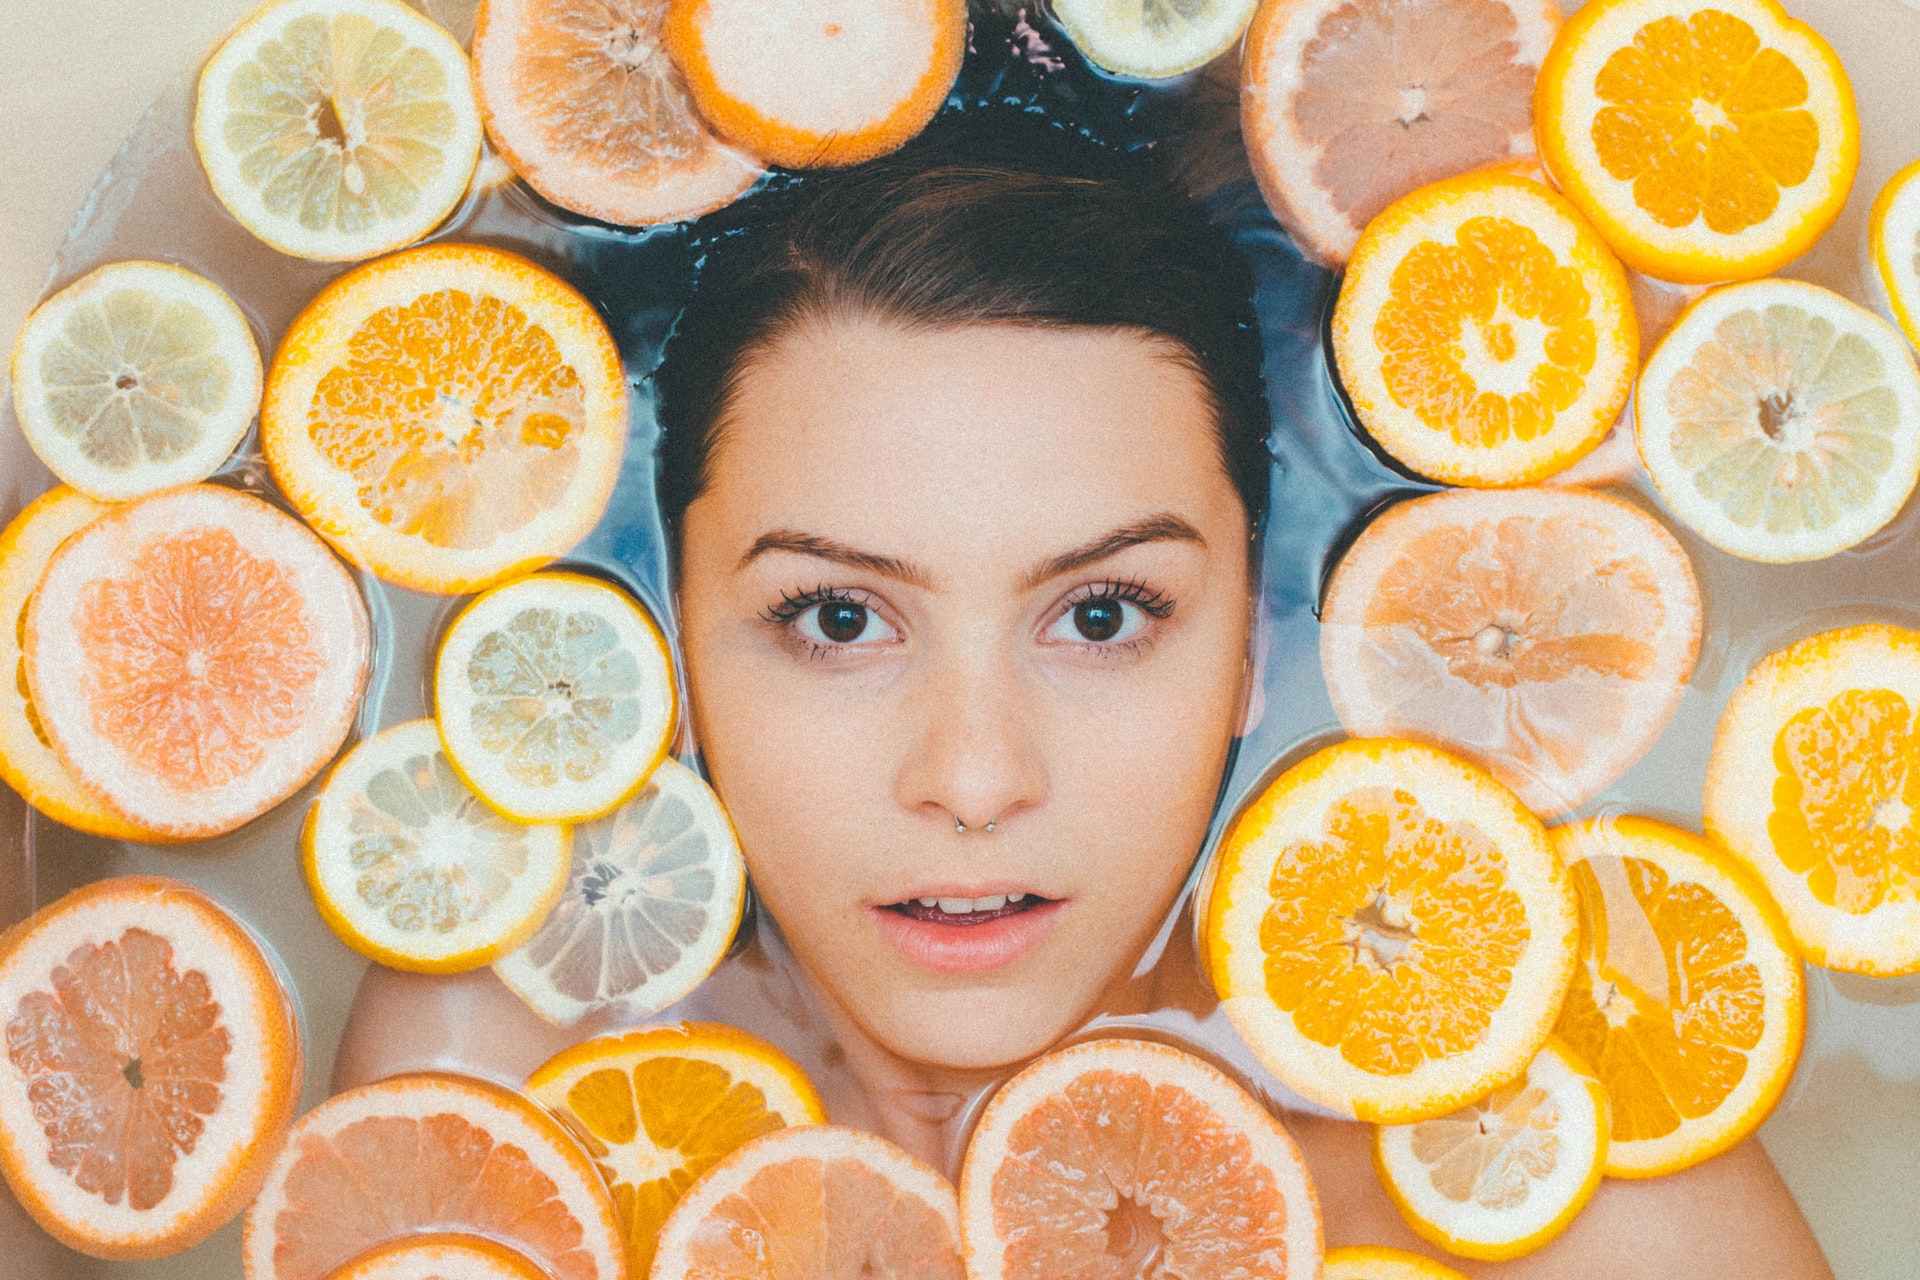 HEALTHY SKIN TIPS: diet + nutrition tips for clearer skin